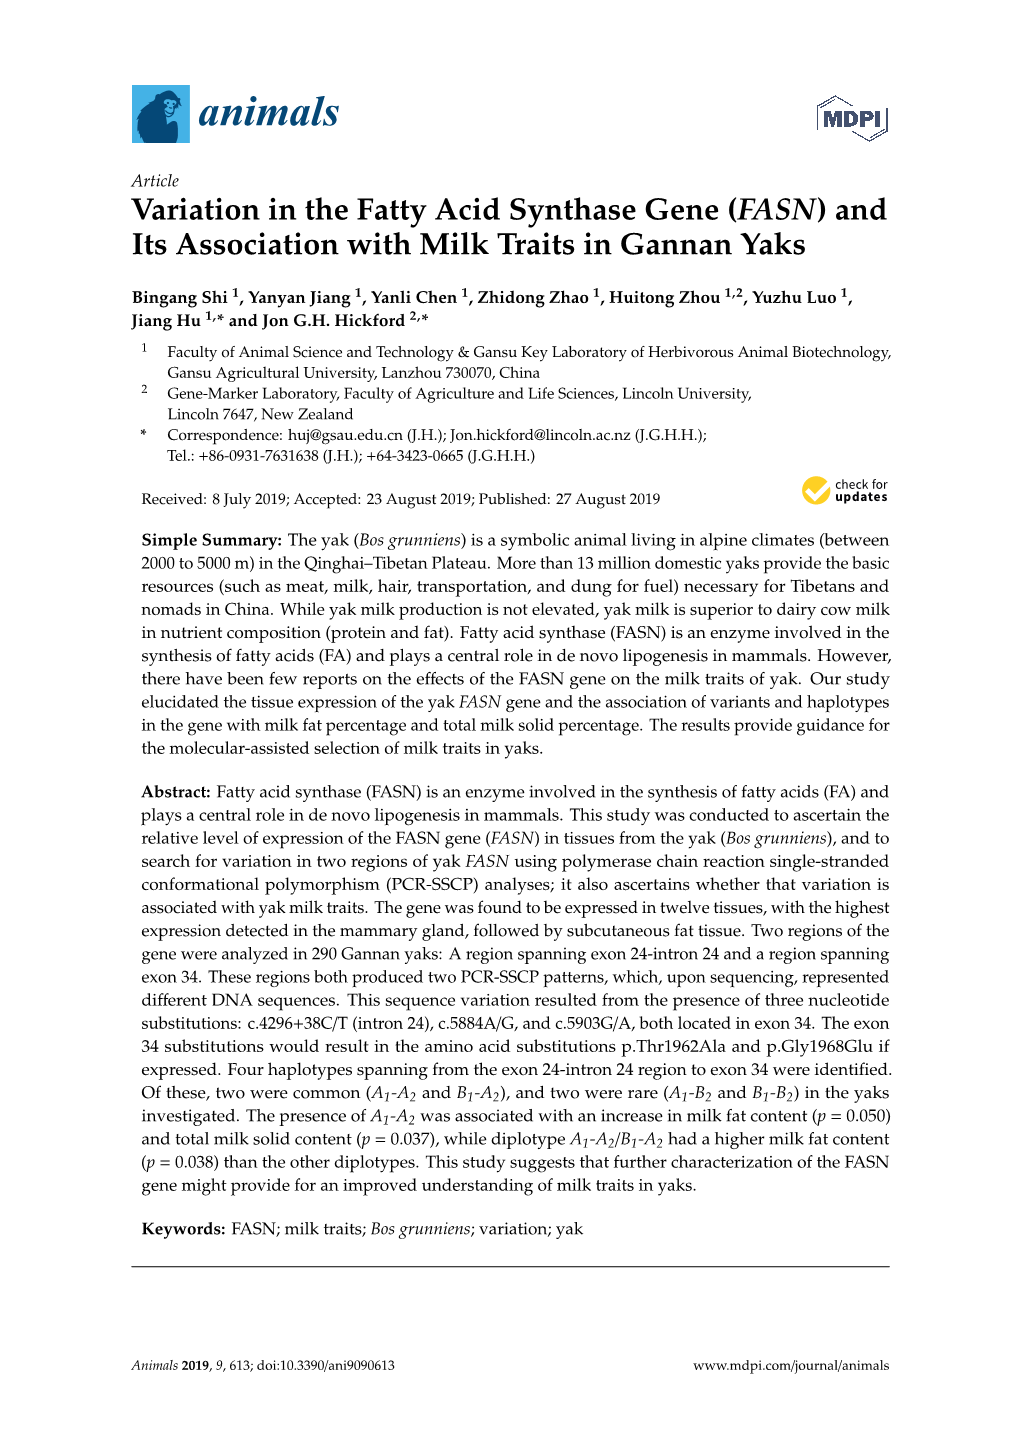 Variation in the Fatty Acid Synthase Gene (FASN) and Its Association with Milk Traits in Gannan Yaks